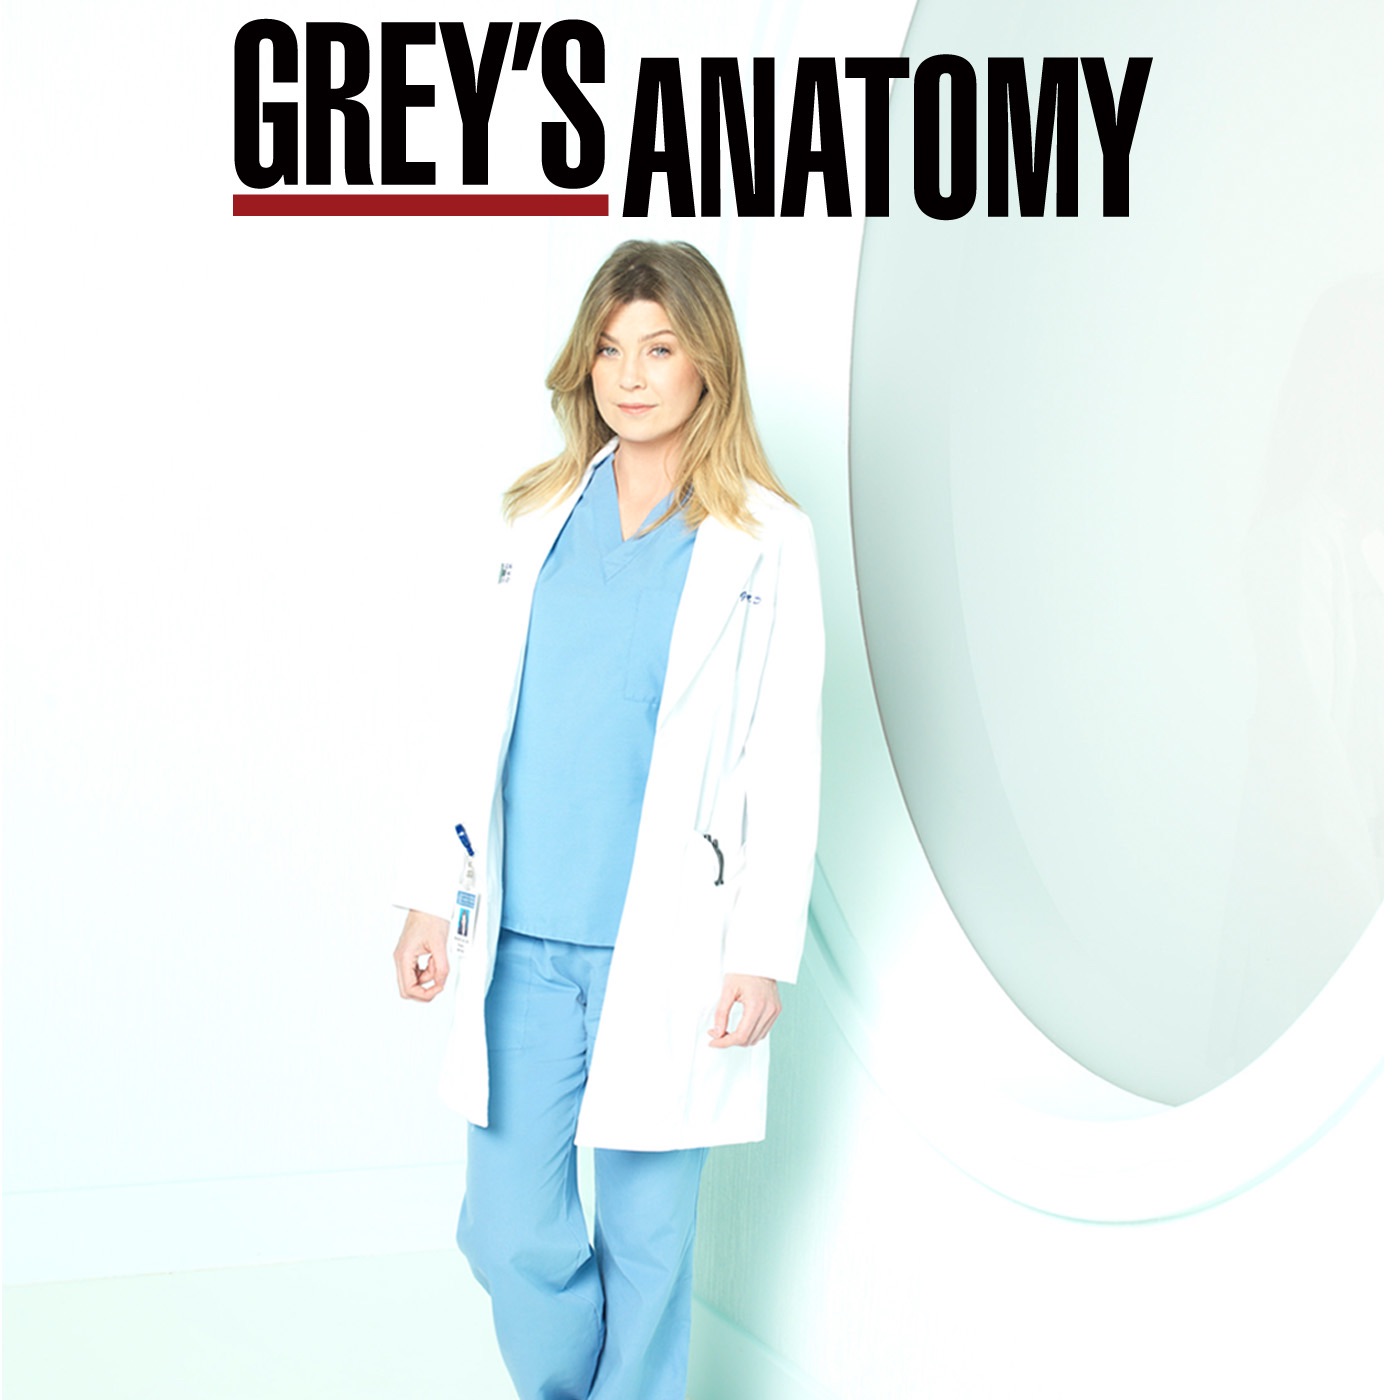 greys anatomy s07 complete - Search and Download